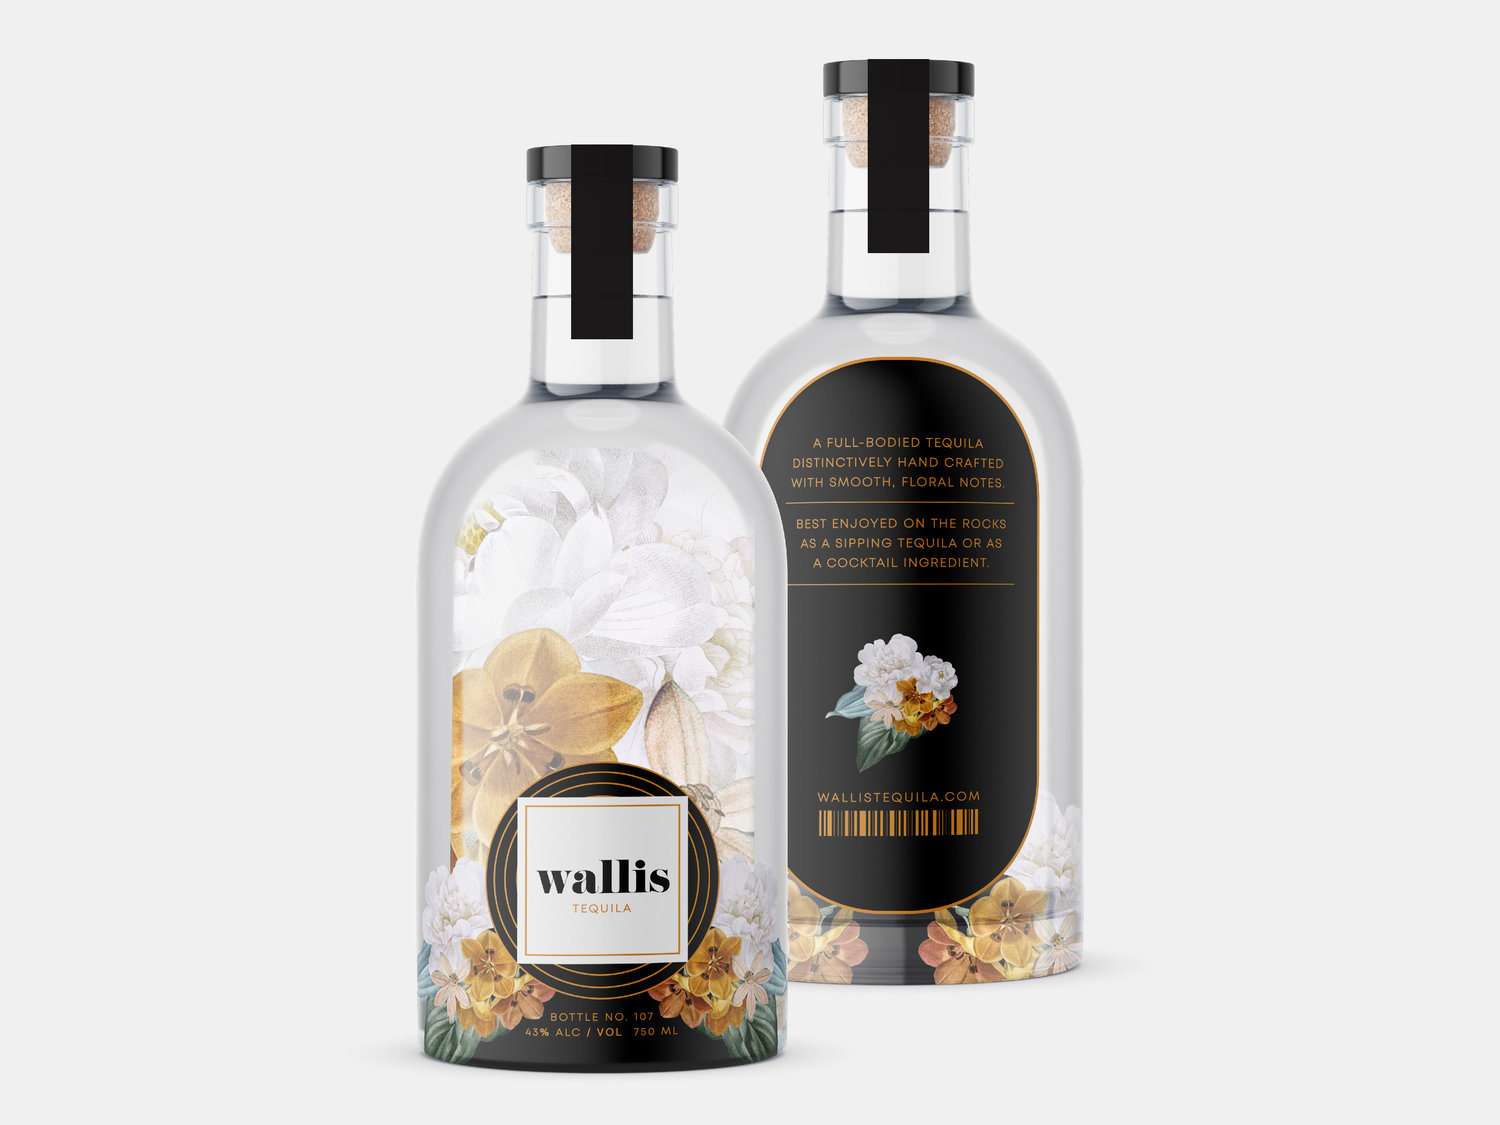 Packaging Design for Wallis Tequila